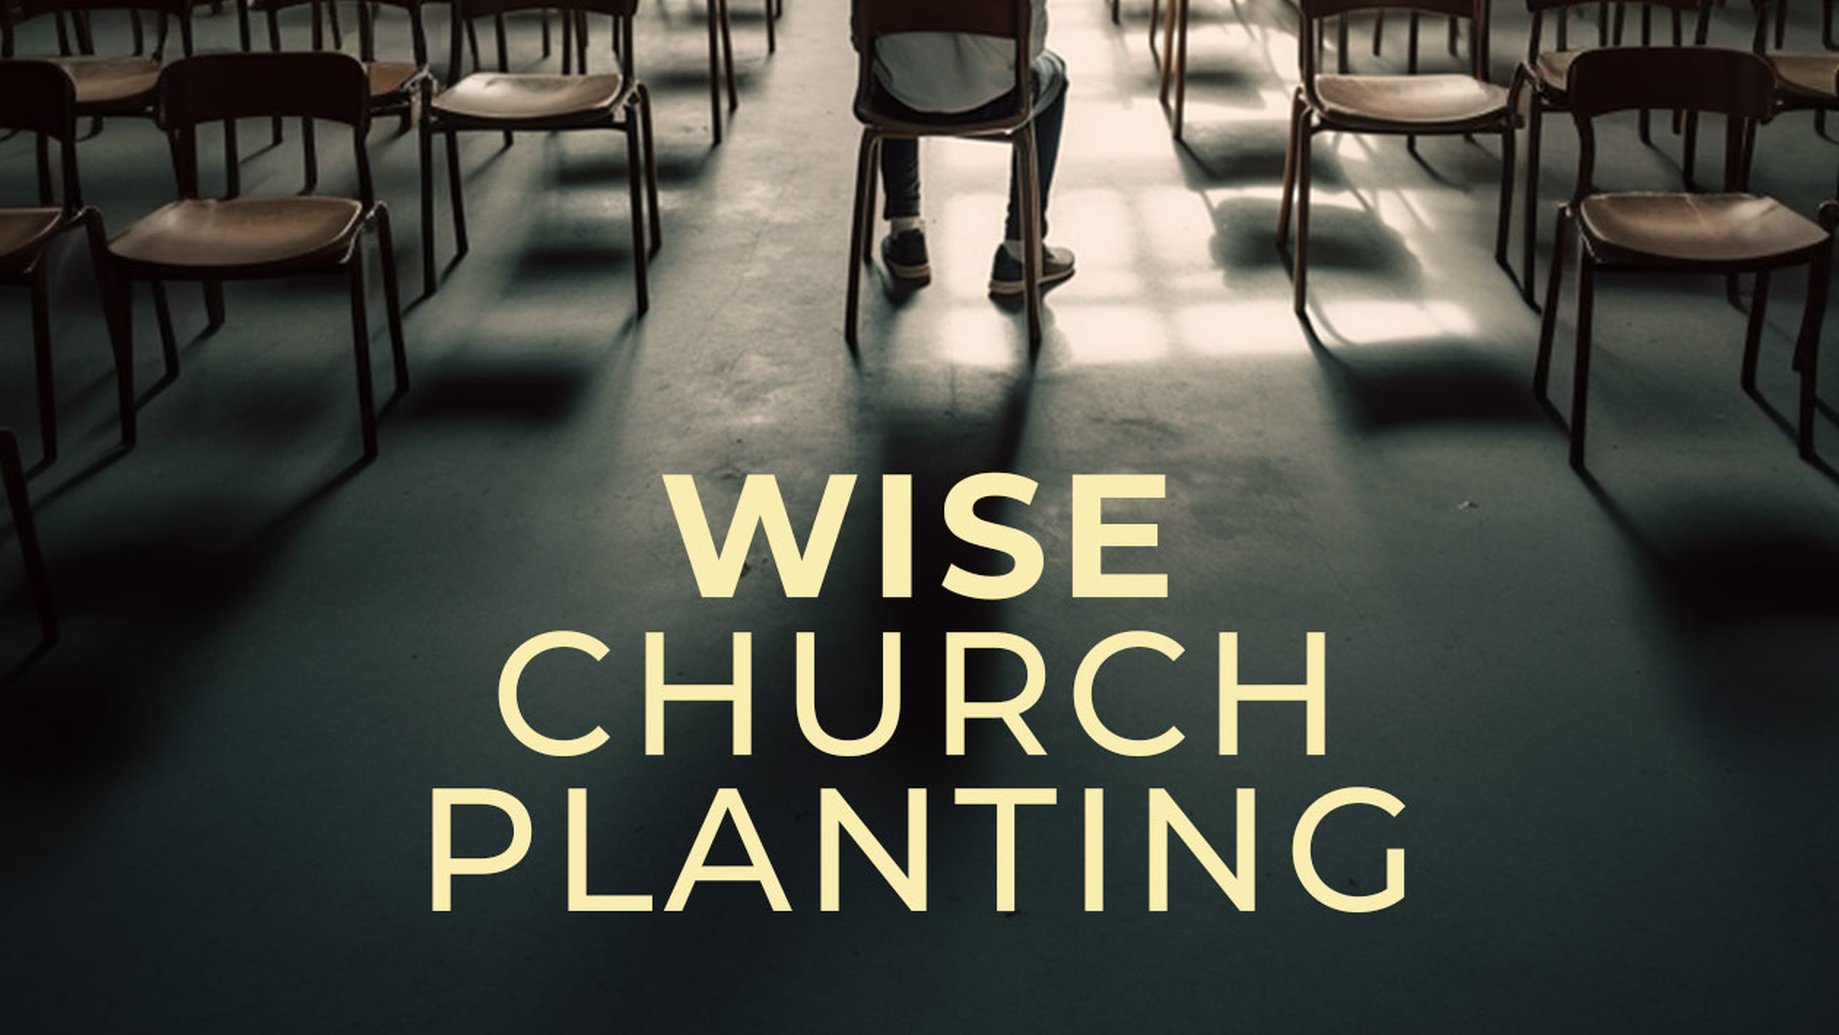 Wise Church Planting: An Introduction